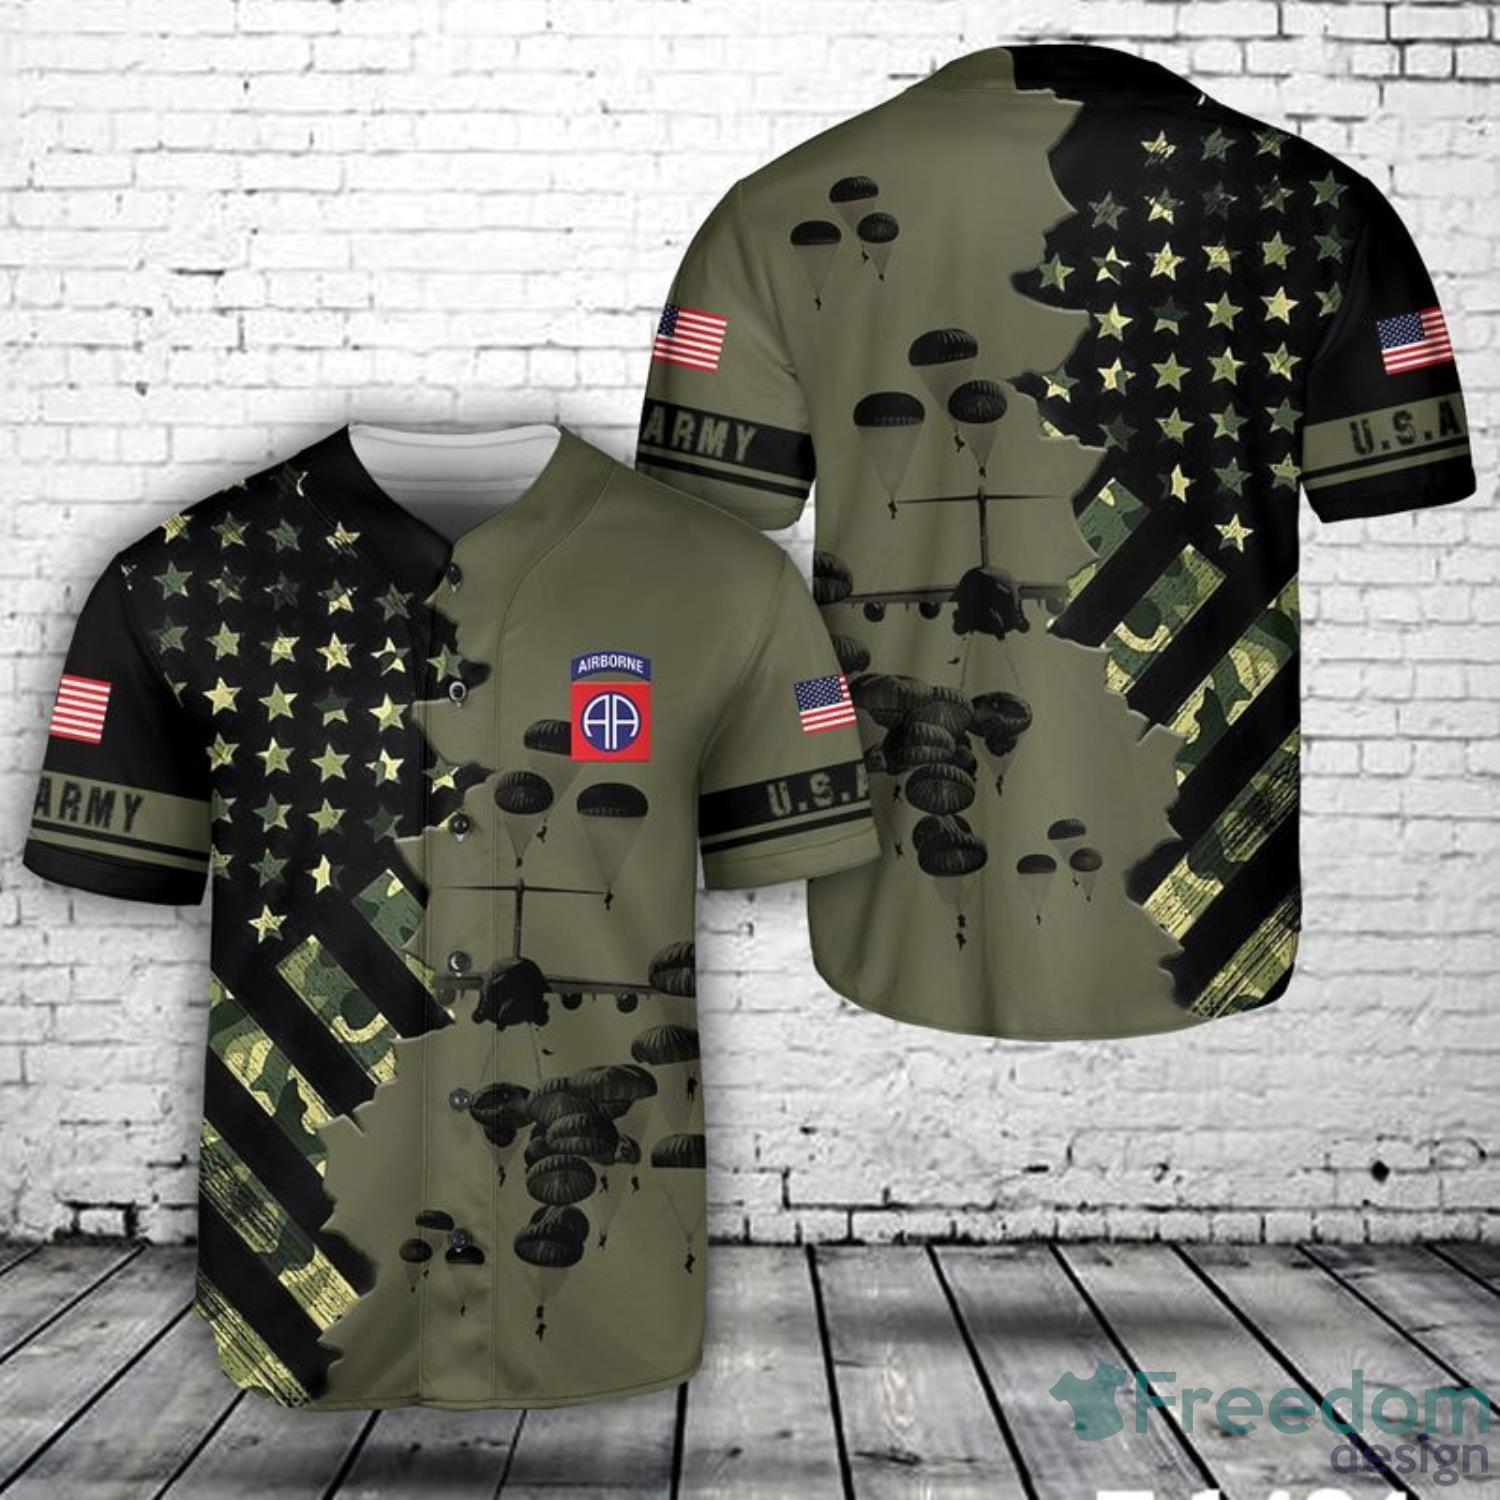 Top 10 Baseball Jersey Designs Cool With Meaning About Army US Veteran